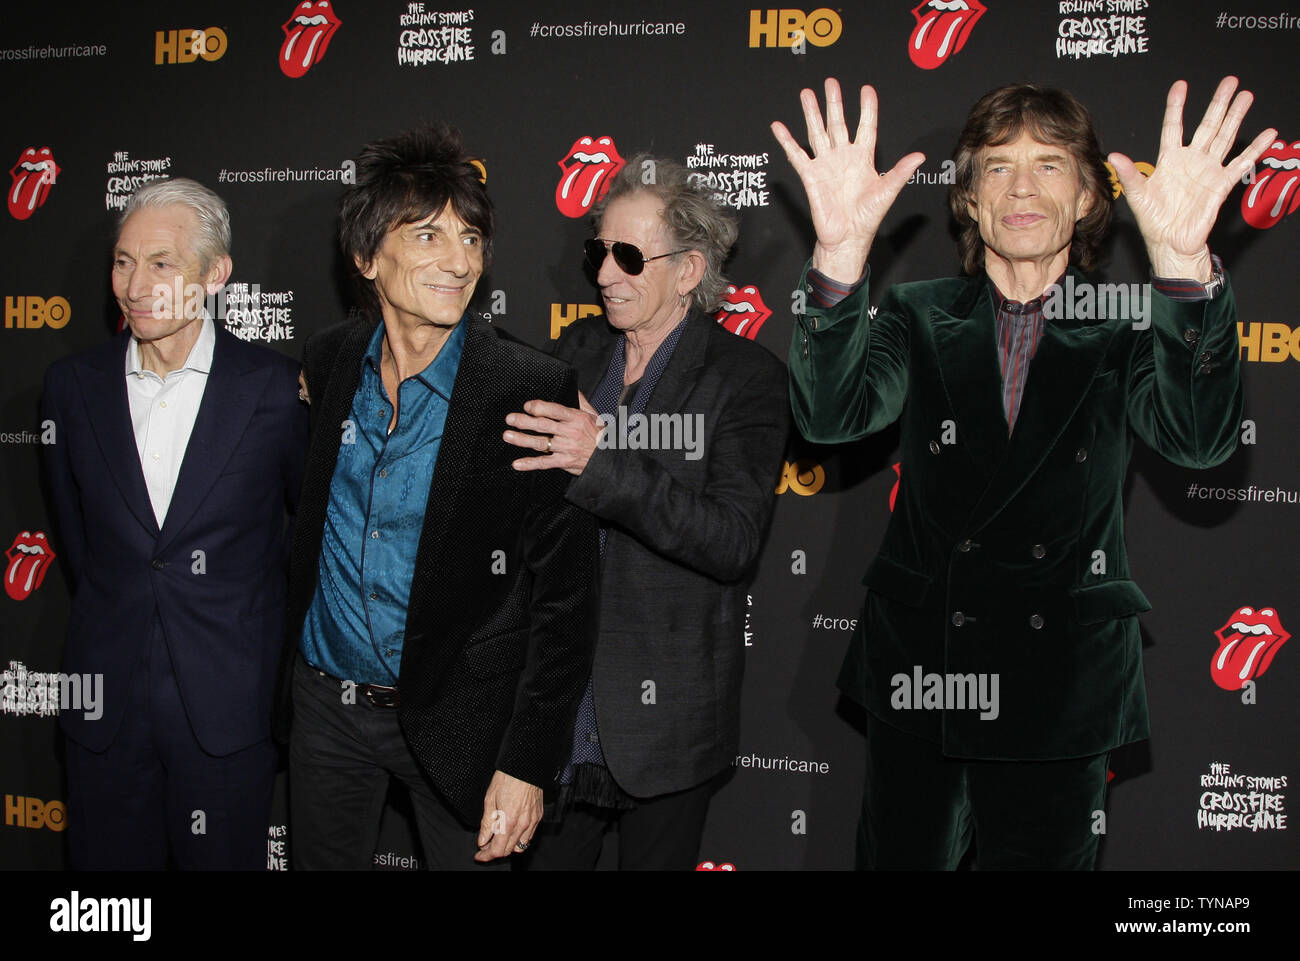 Mick Jagger, Keith Richards, Ronnie Wood and Charlie Watts of the Rolling Stones arrive on the red carpet at the premiere of HBO's Crossfire Hurricane at the the Ziegfeld Theater in New York City on November 13, 2012.       UPI/John Angelillo Stock Photo